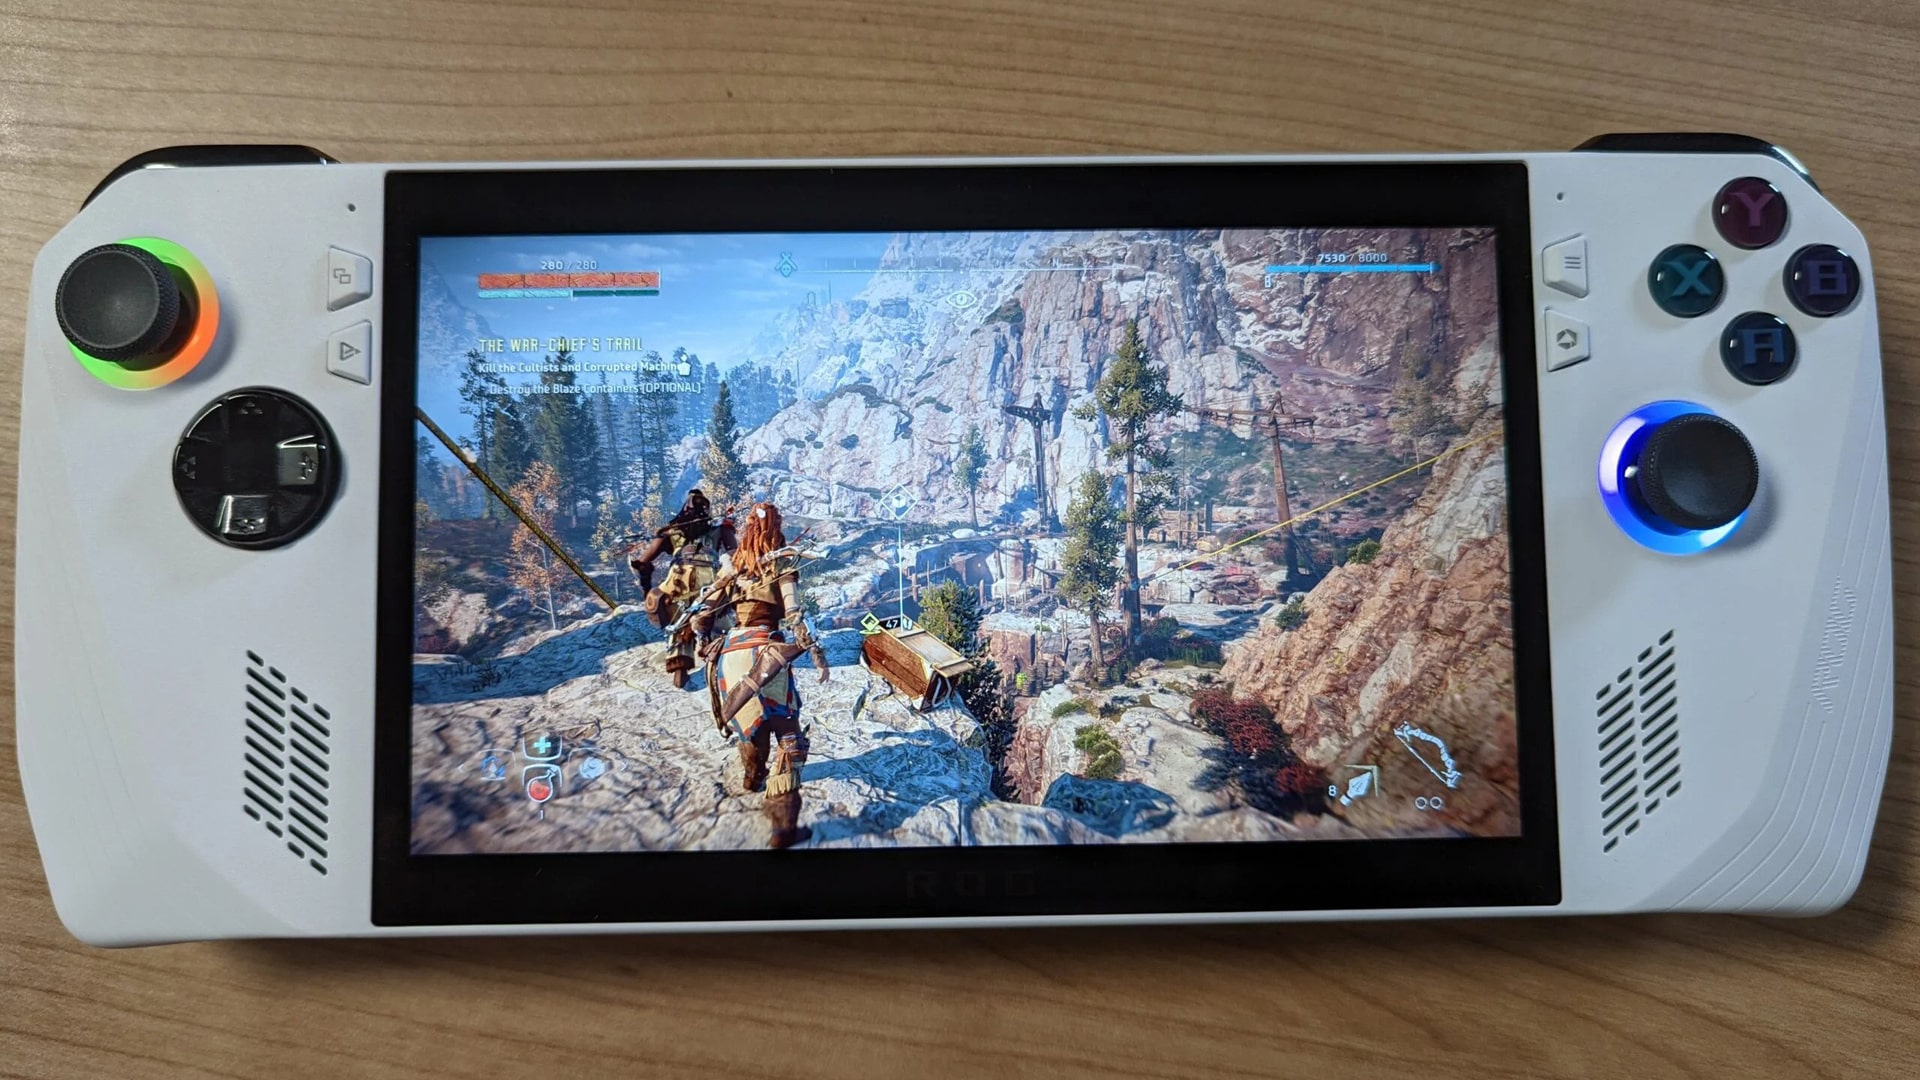 ASUS ROG Ally, a powerful Windows-based handheld gaming device